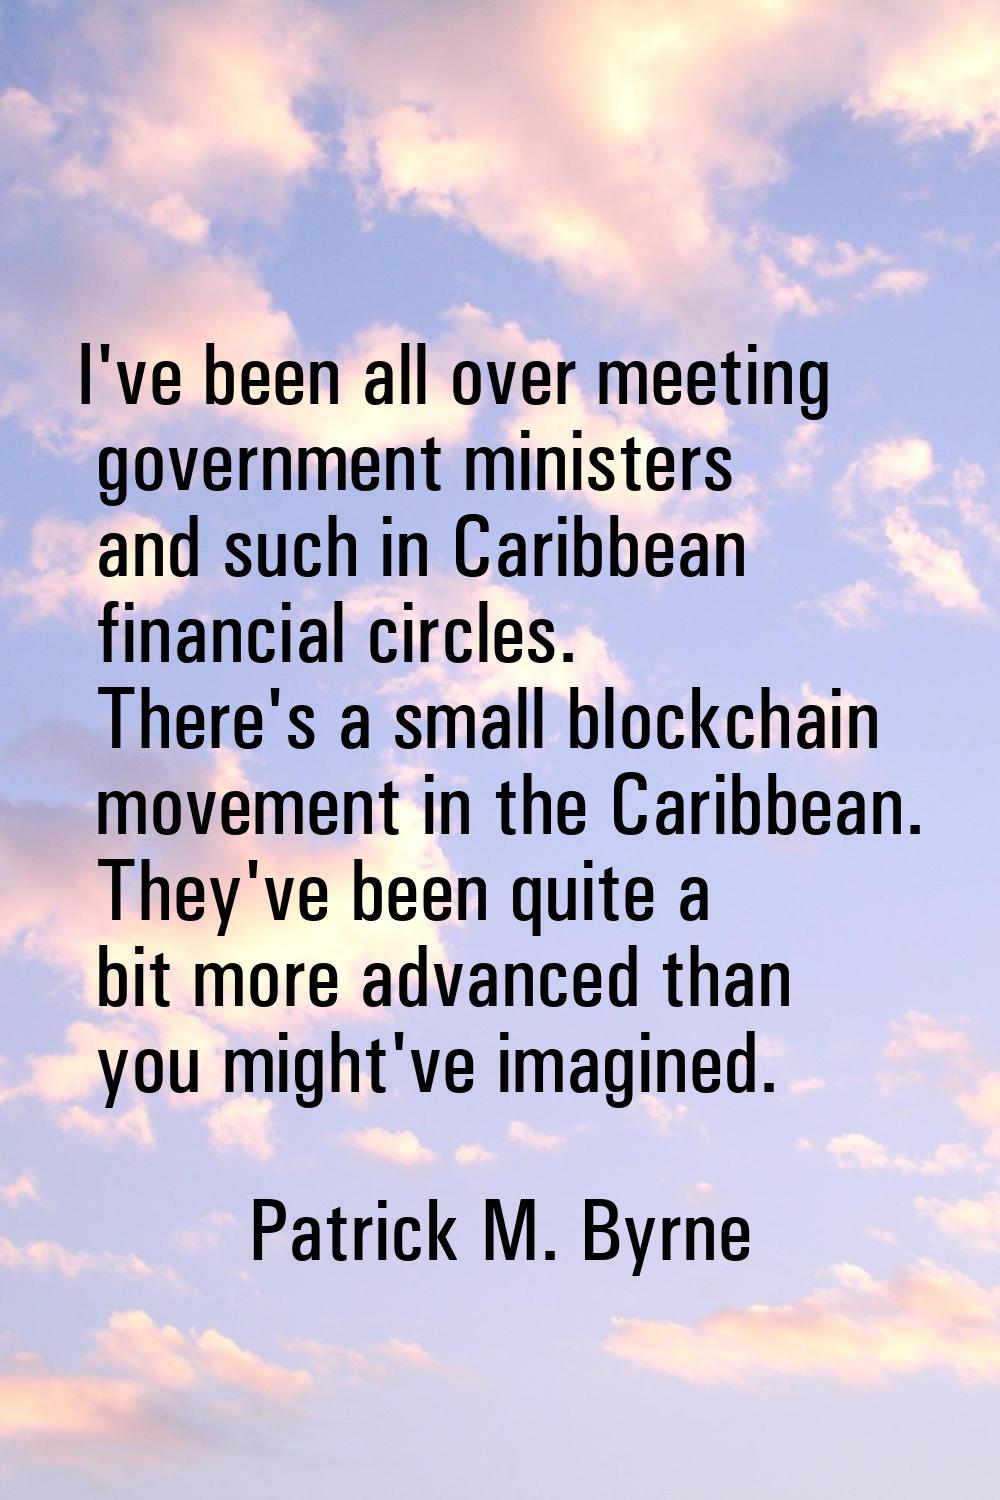 I've been all over meeting government ministers and such in Caribbean financial circles. There's a 